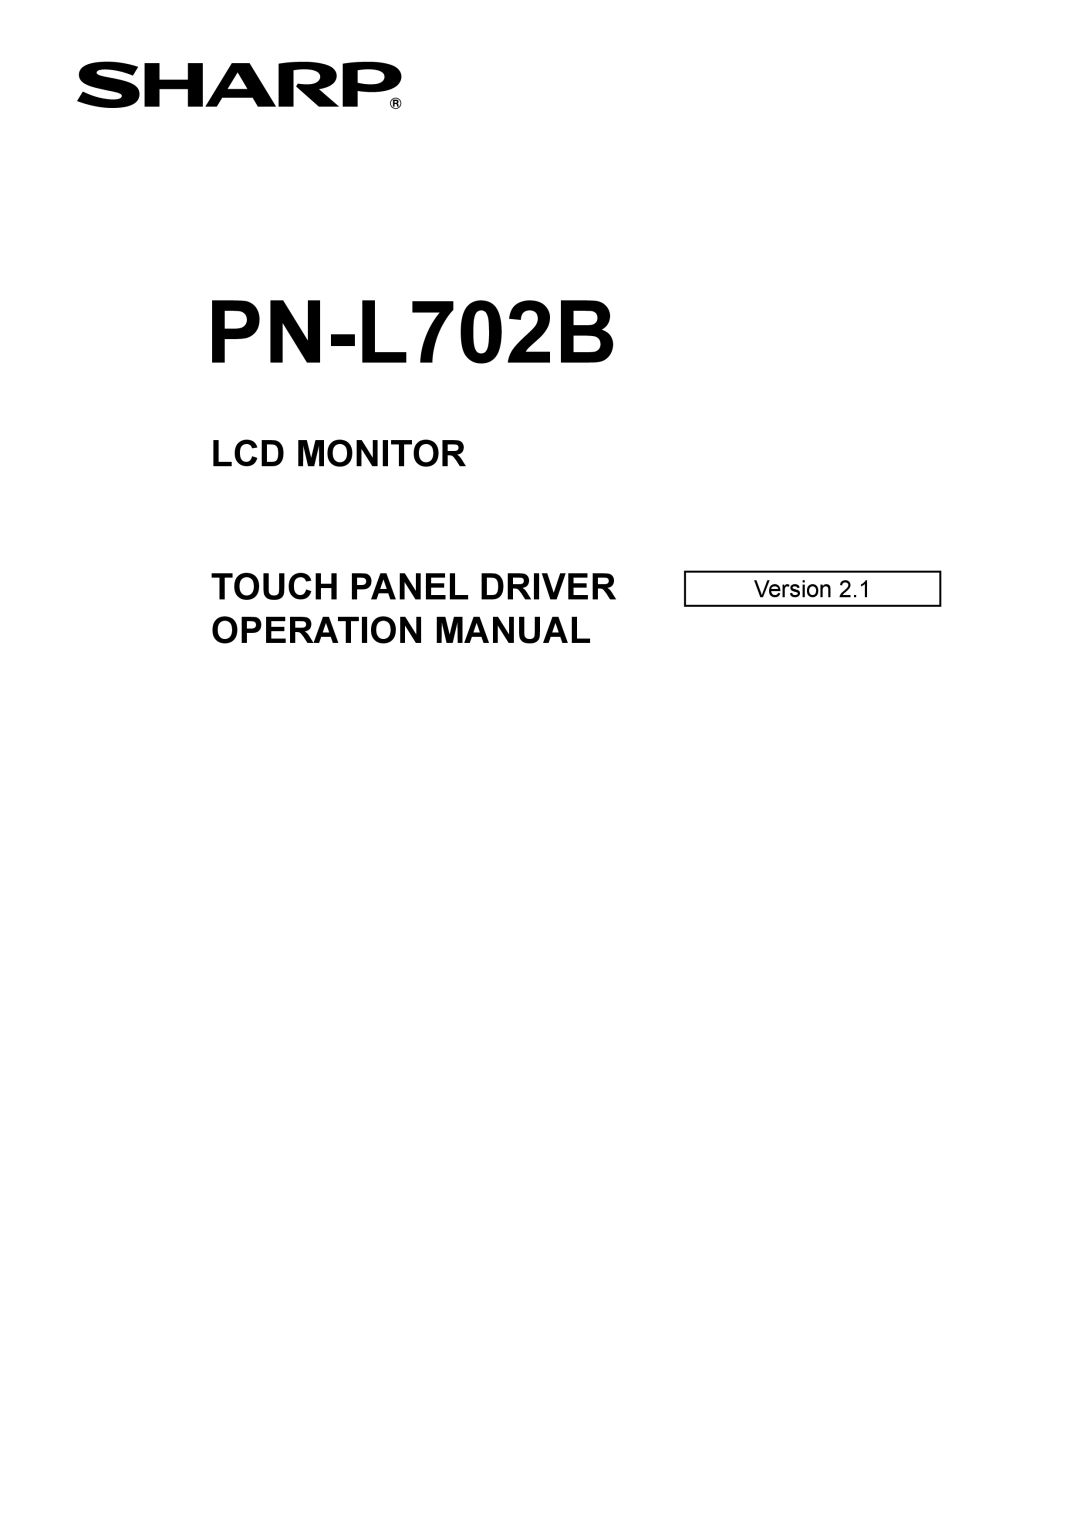 Sharp PN-L702B operation manual Lcd Monitor, Touch Panel Driver Operation Manual, Version 